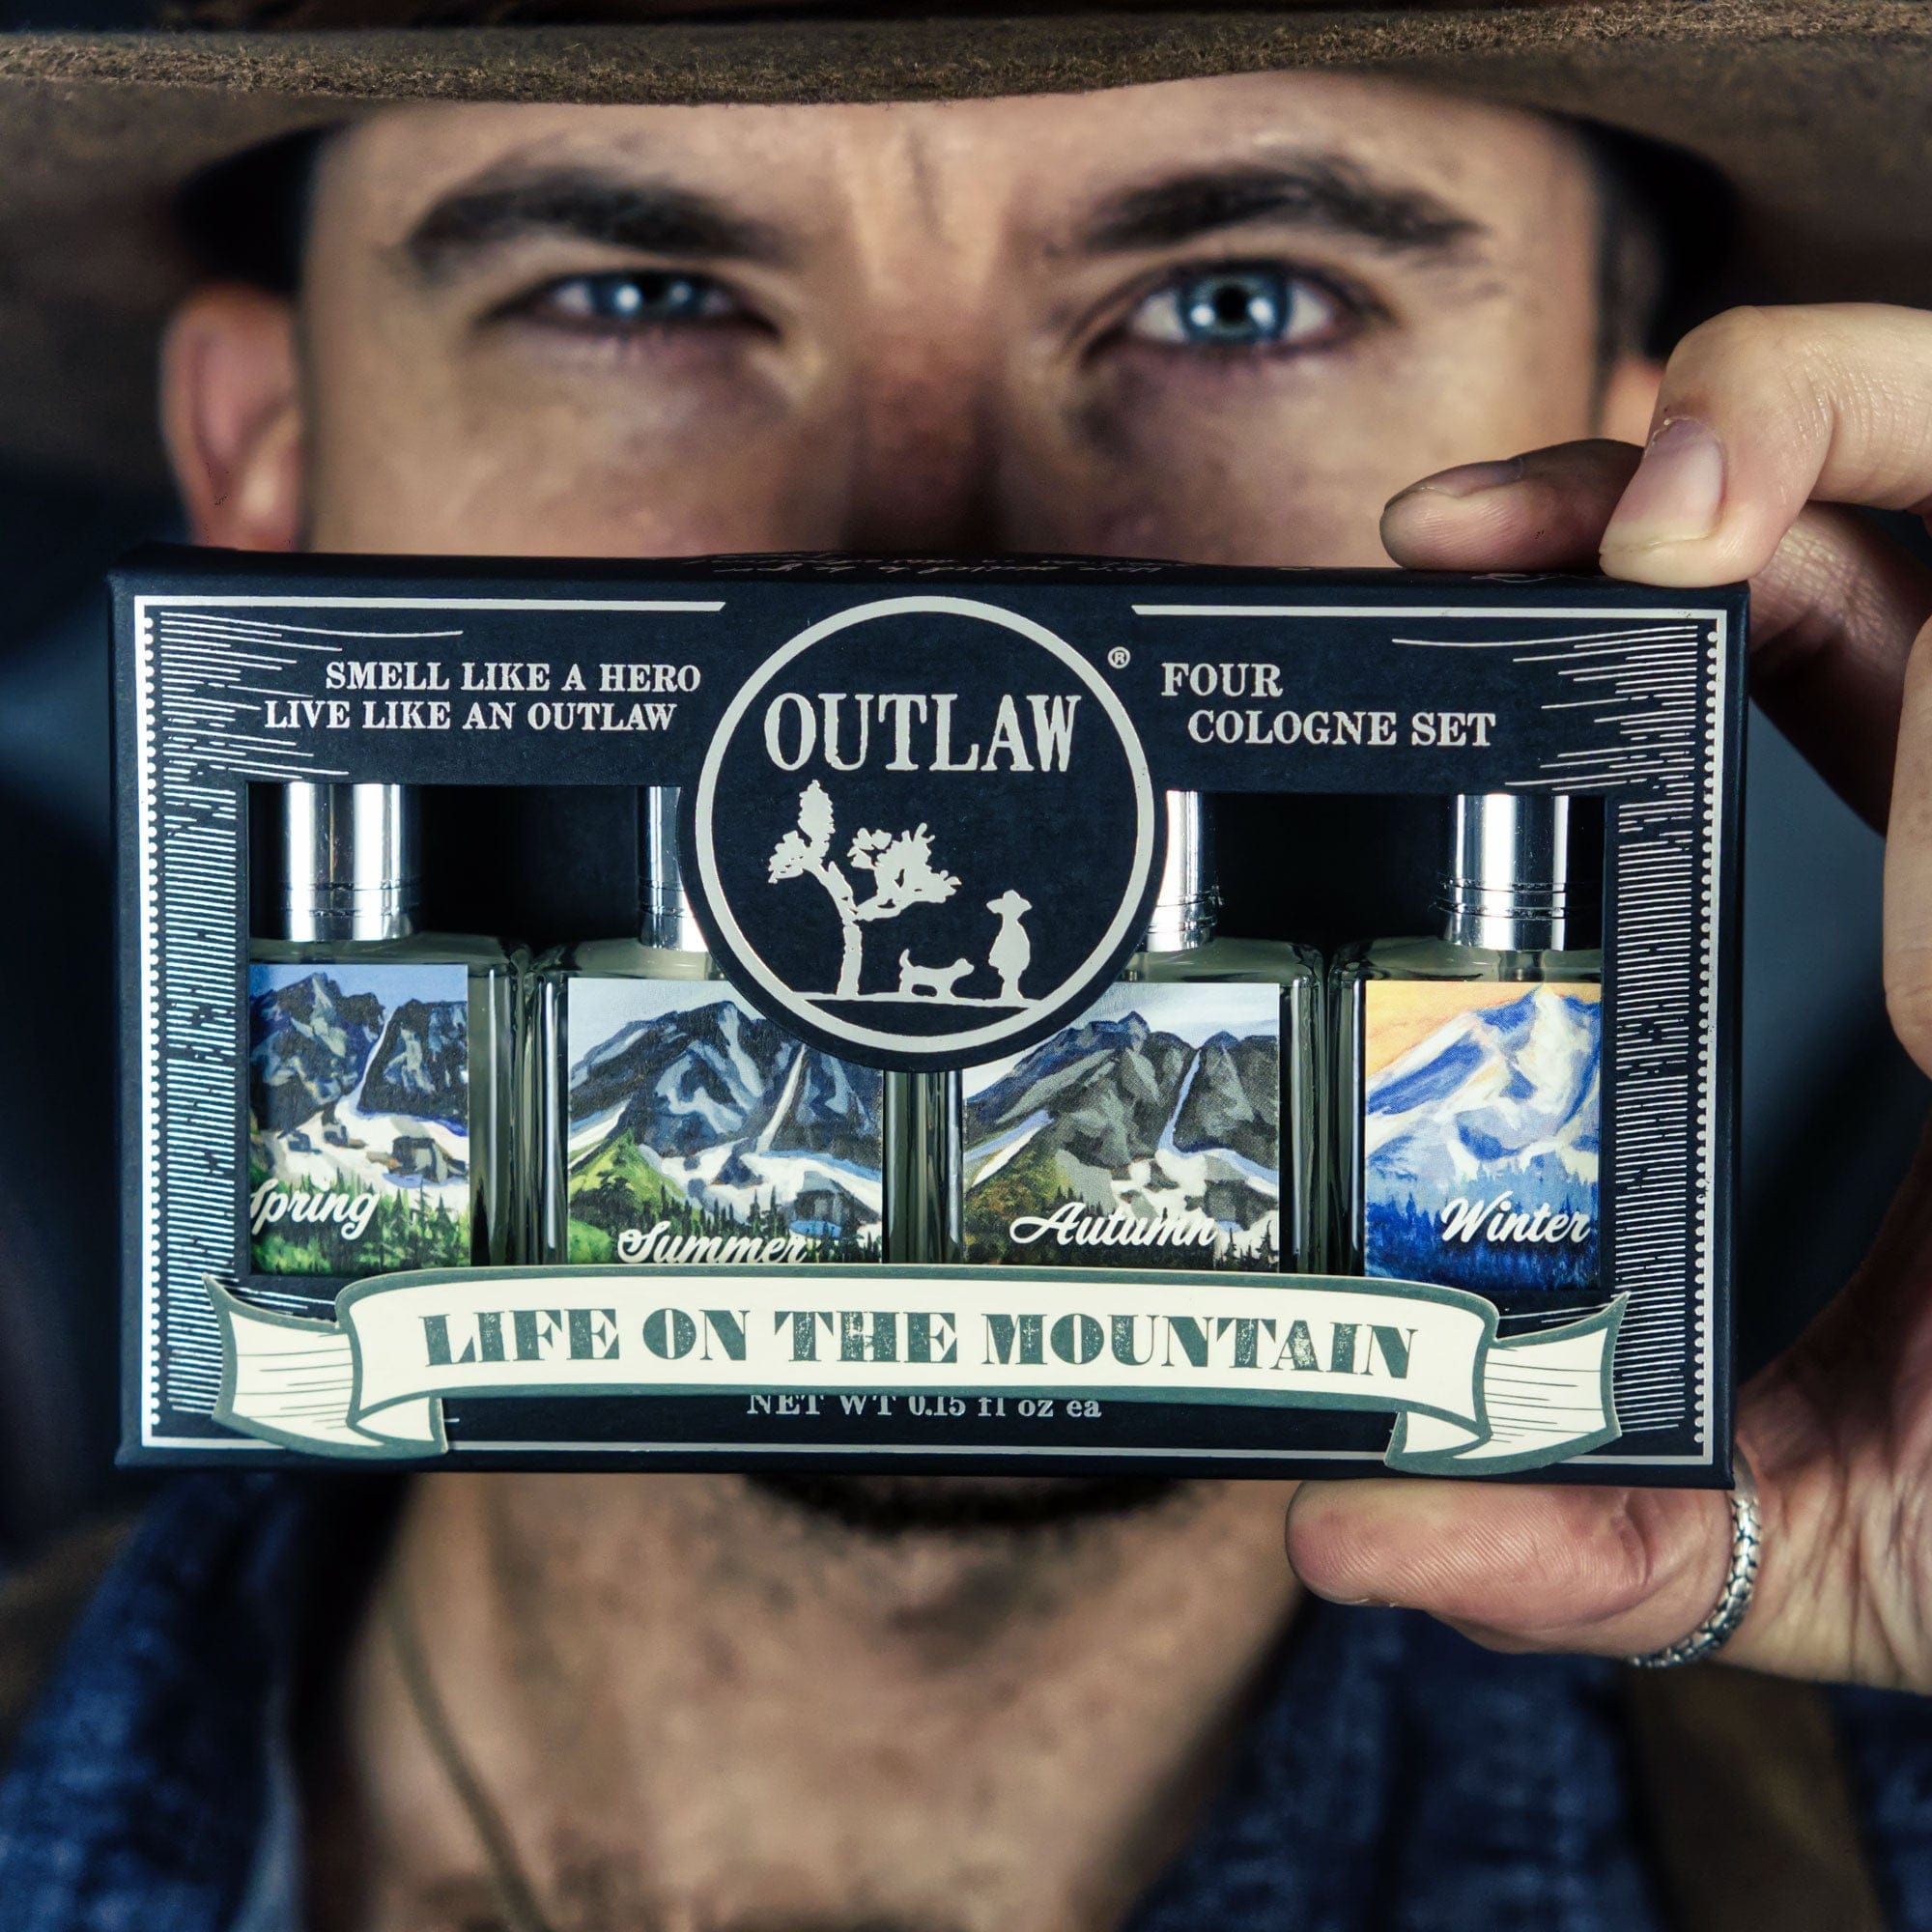 Outlaw Fragrance Life on the Mountain Cologne - Four Seasons of the Forest in One Boxed Set